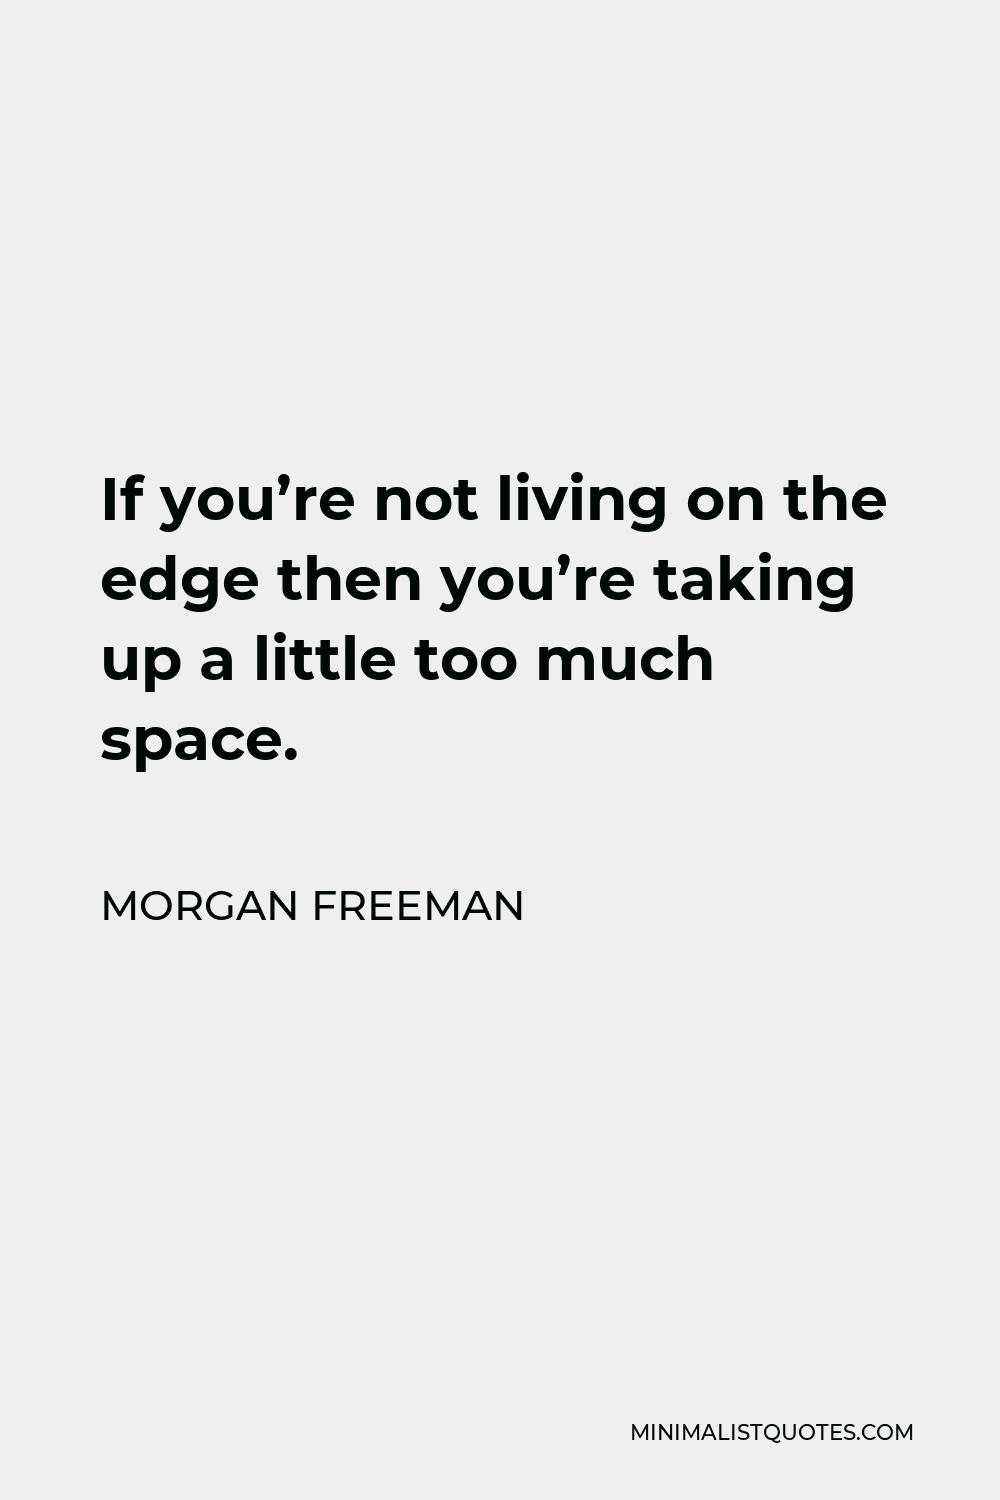 Morgan Freeman Quote: If You'Re Not Living On The Edge Then You'Re Taking  Up A Little Too Much Space.